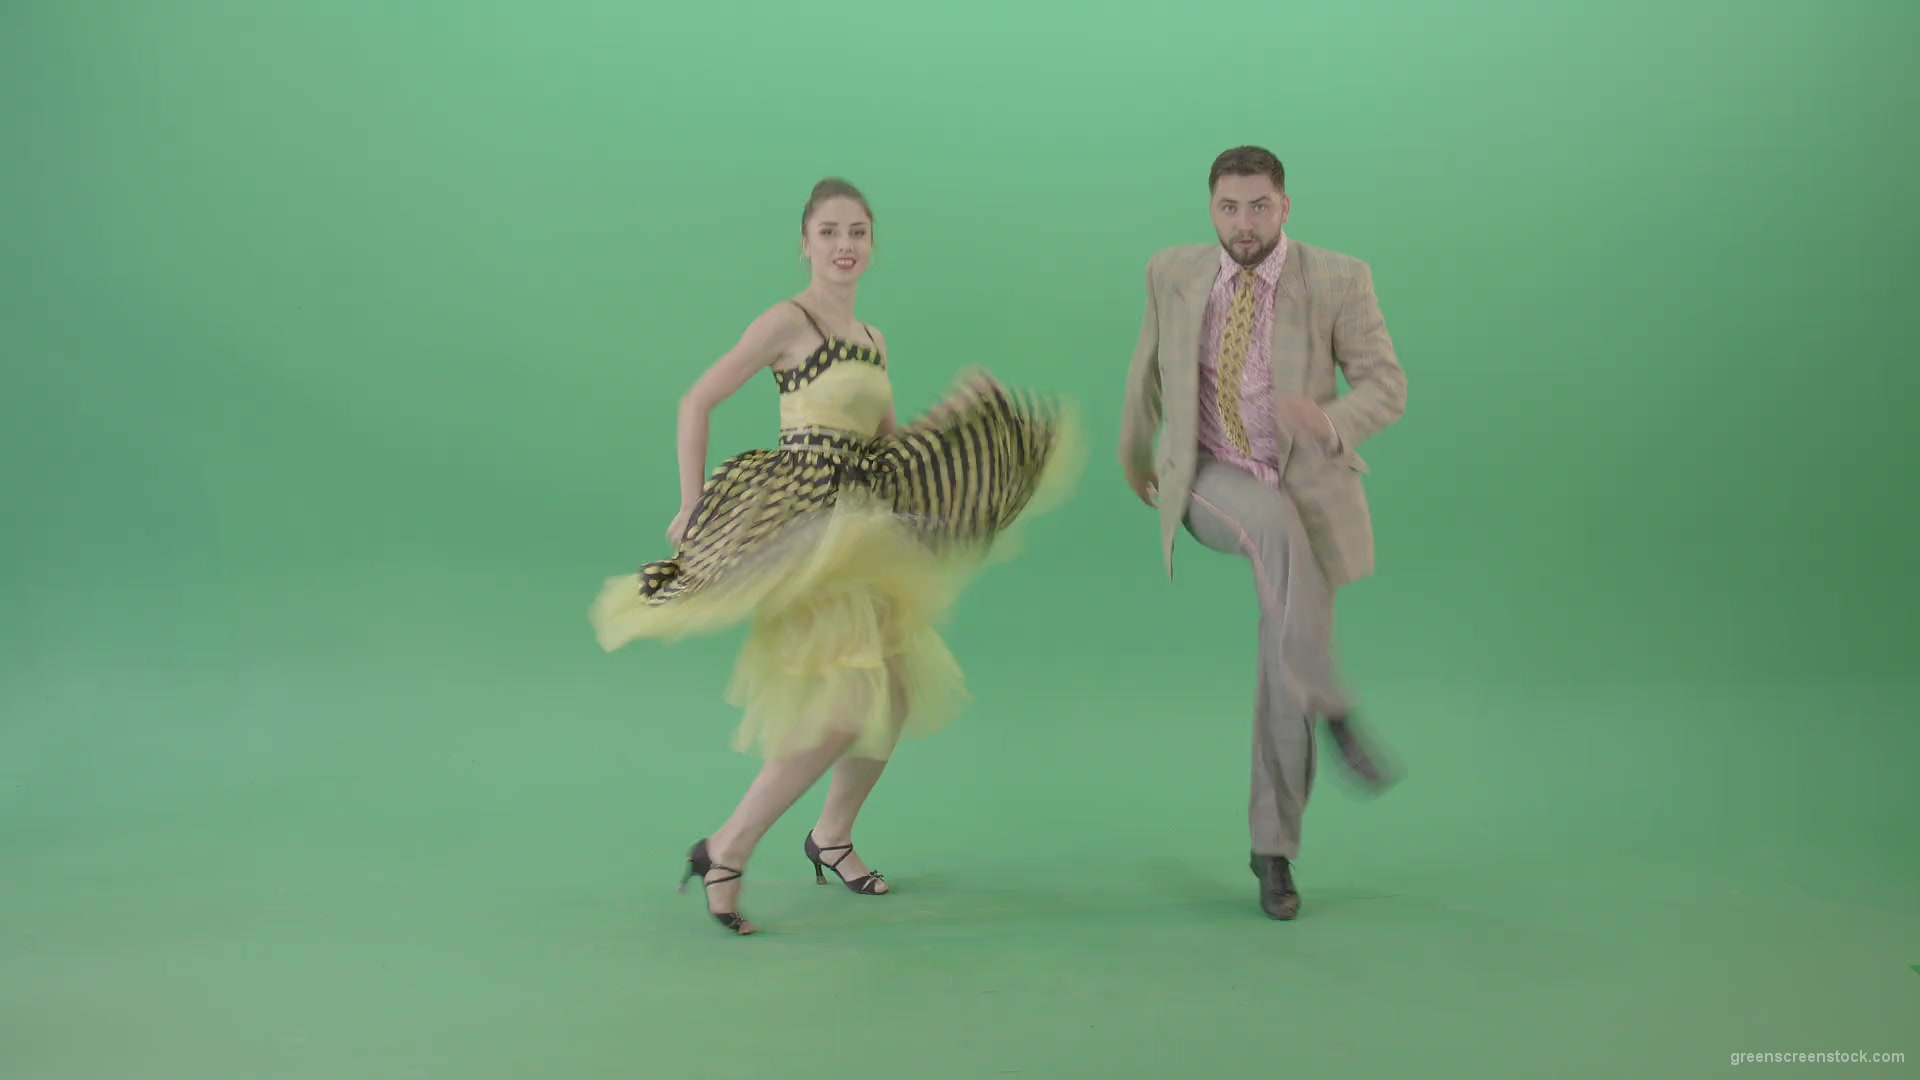 Beautiful-man-and-woman-dancing-Lindy-Hop-Jazz-and-Swing-dance-isolated-on-Green-Screen-4K-Video-Footage-1920_001 Green Screen Stock